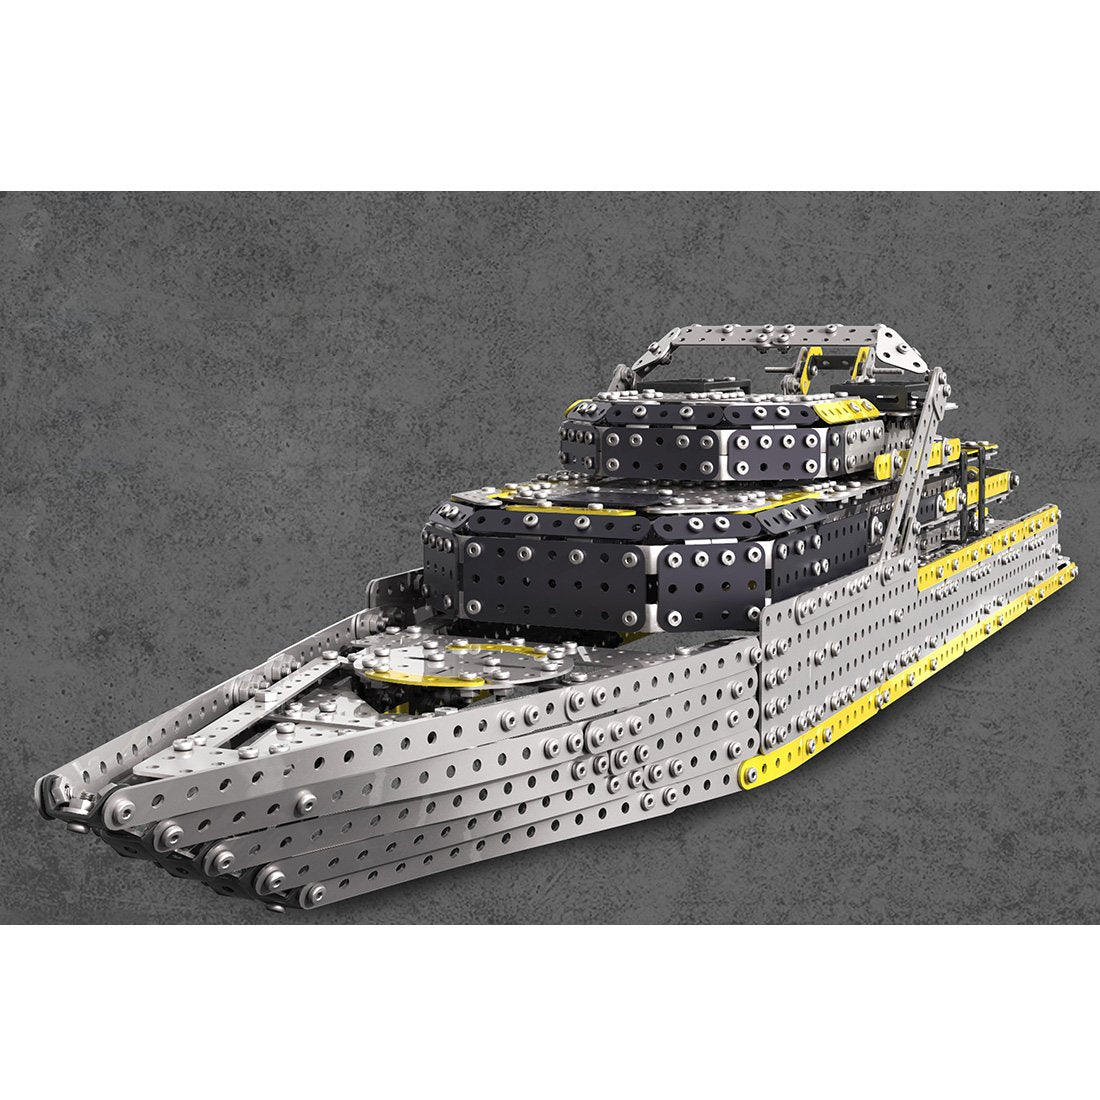 2451Pcs Assembly Screw 3D Mechanical Large Cruise Ship Metal Puzzle Model Kit Toy